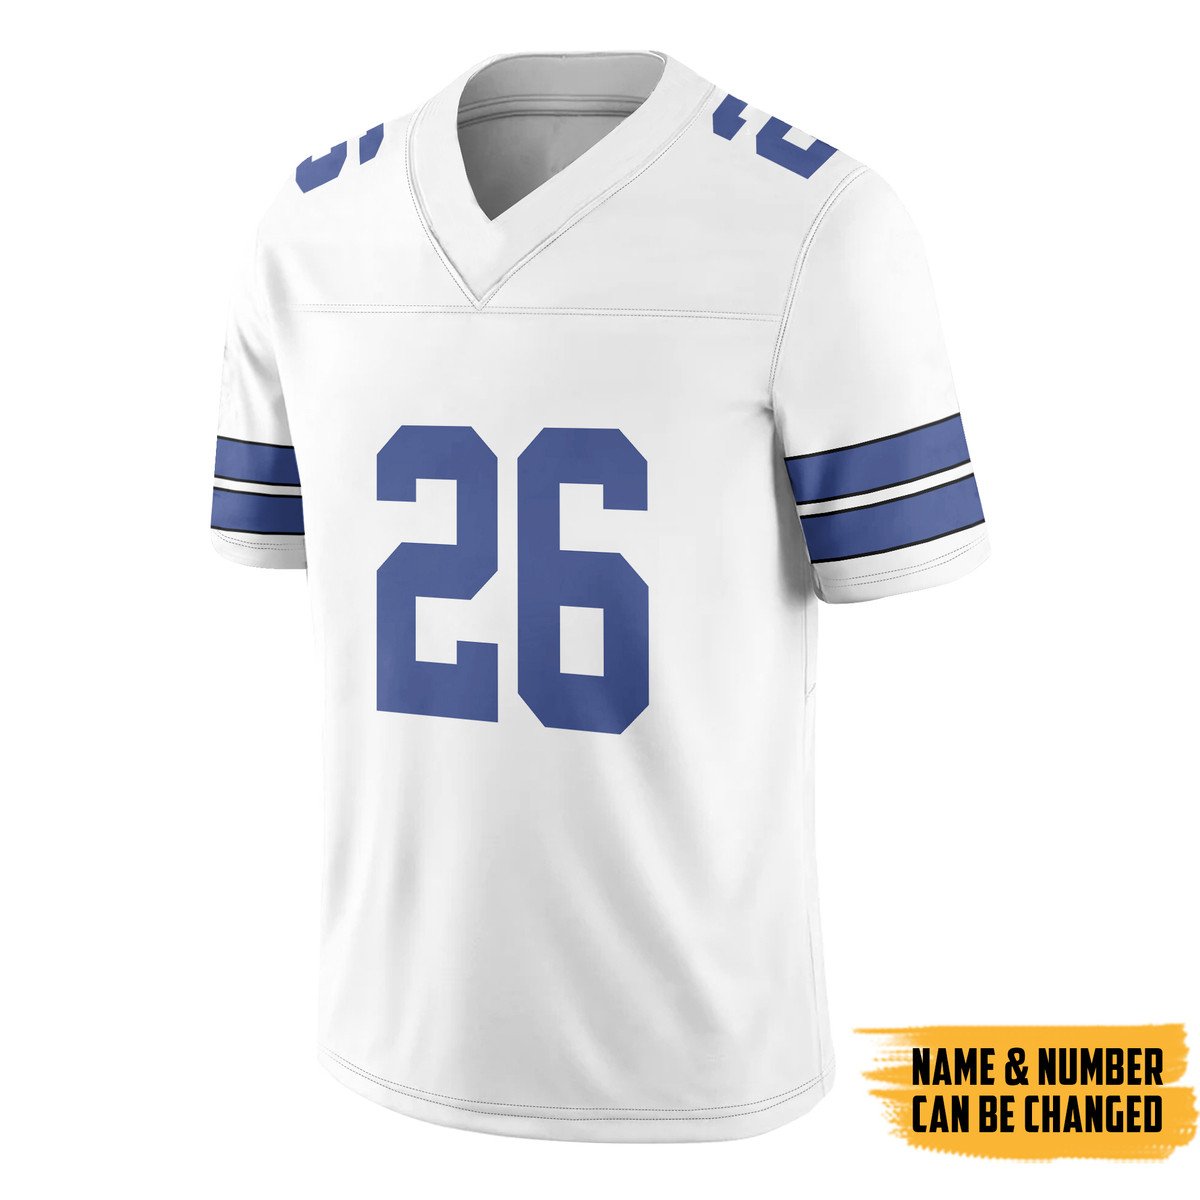 TOP Dallas Cowboyy Personalized Custom Football All Over Print Jersey 8